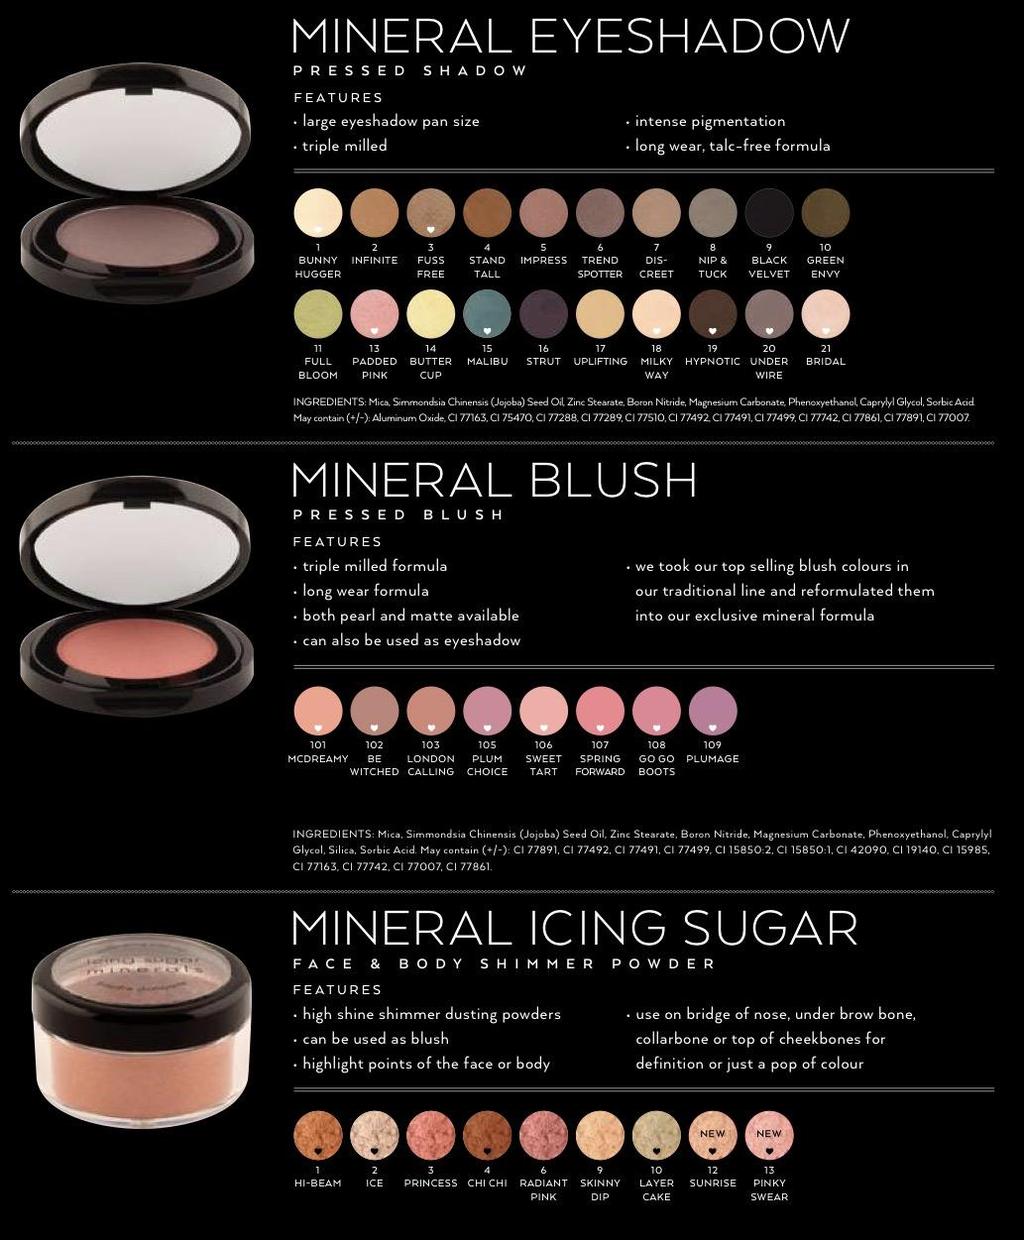 Description: Long wearing mineral eyeshadow that never fades and stays true to color.